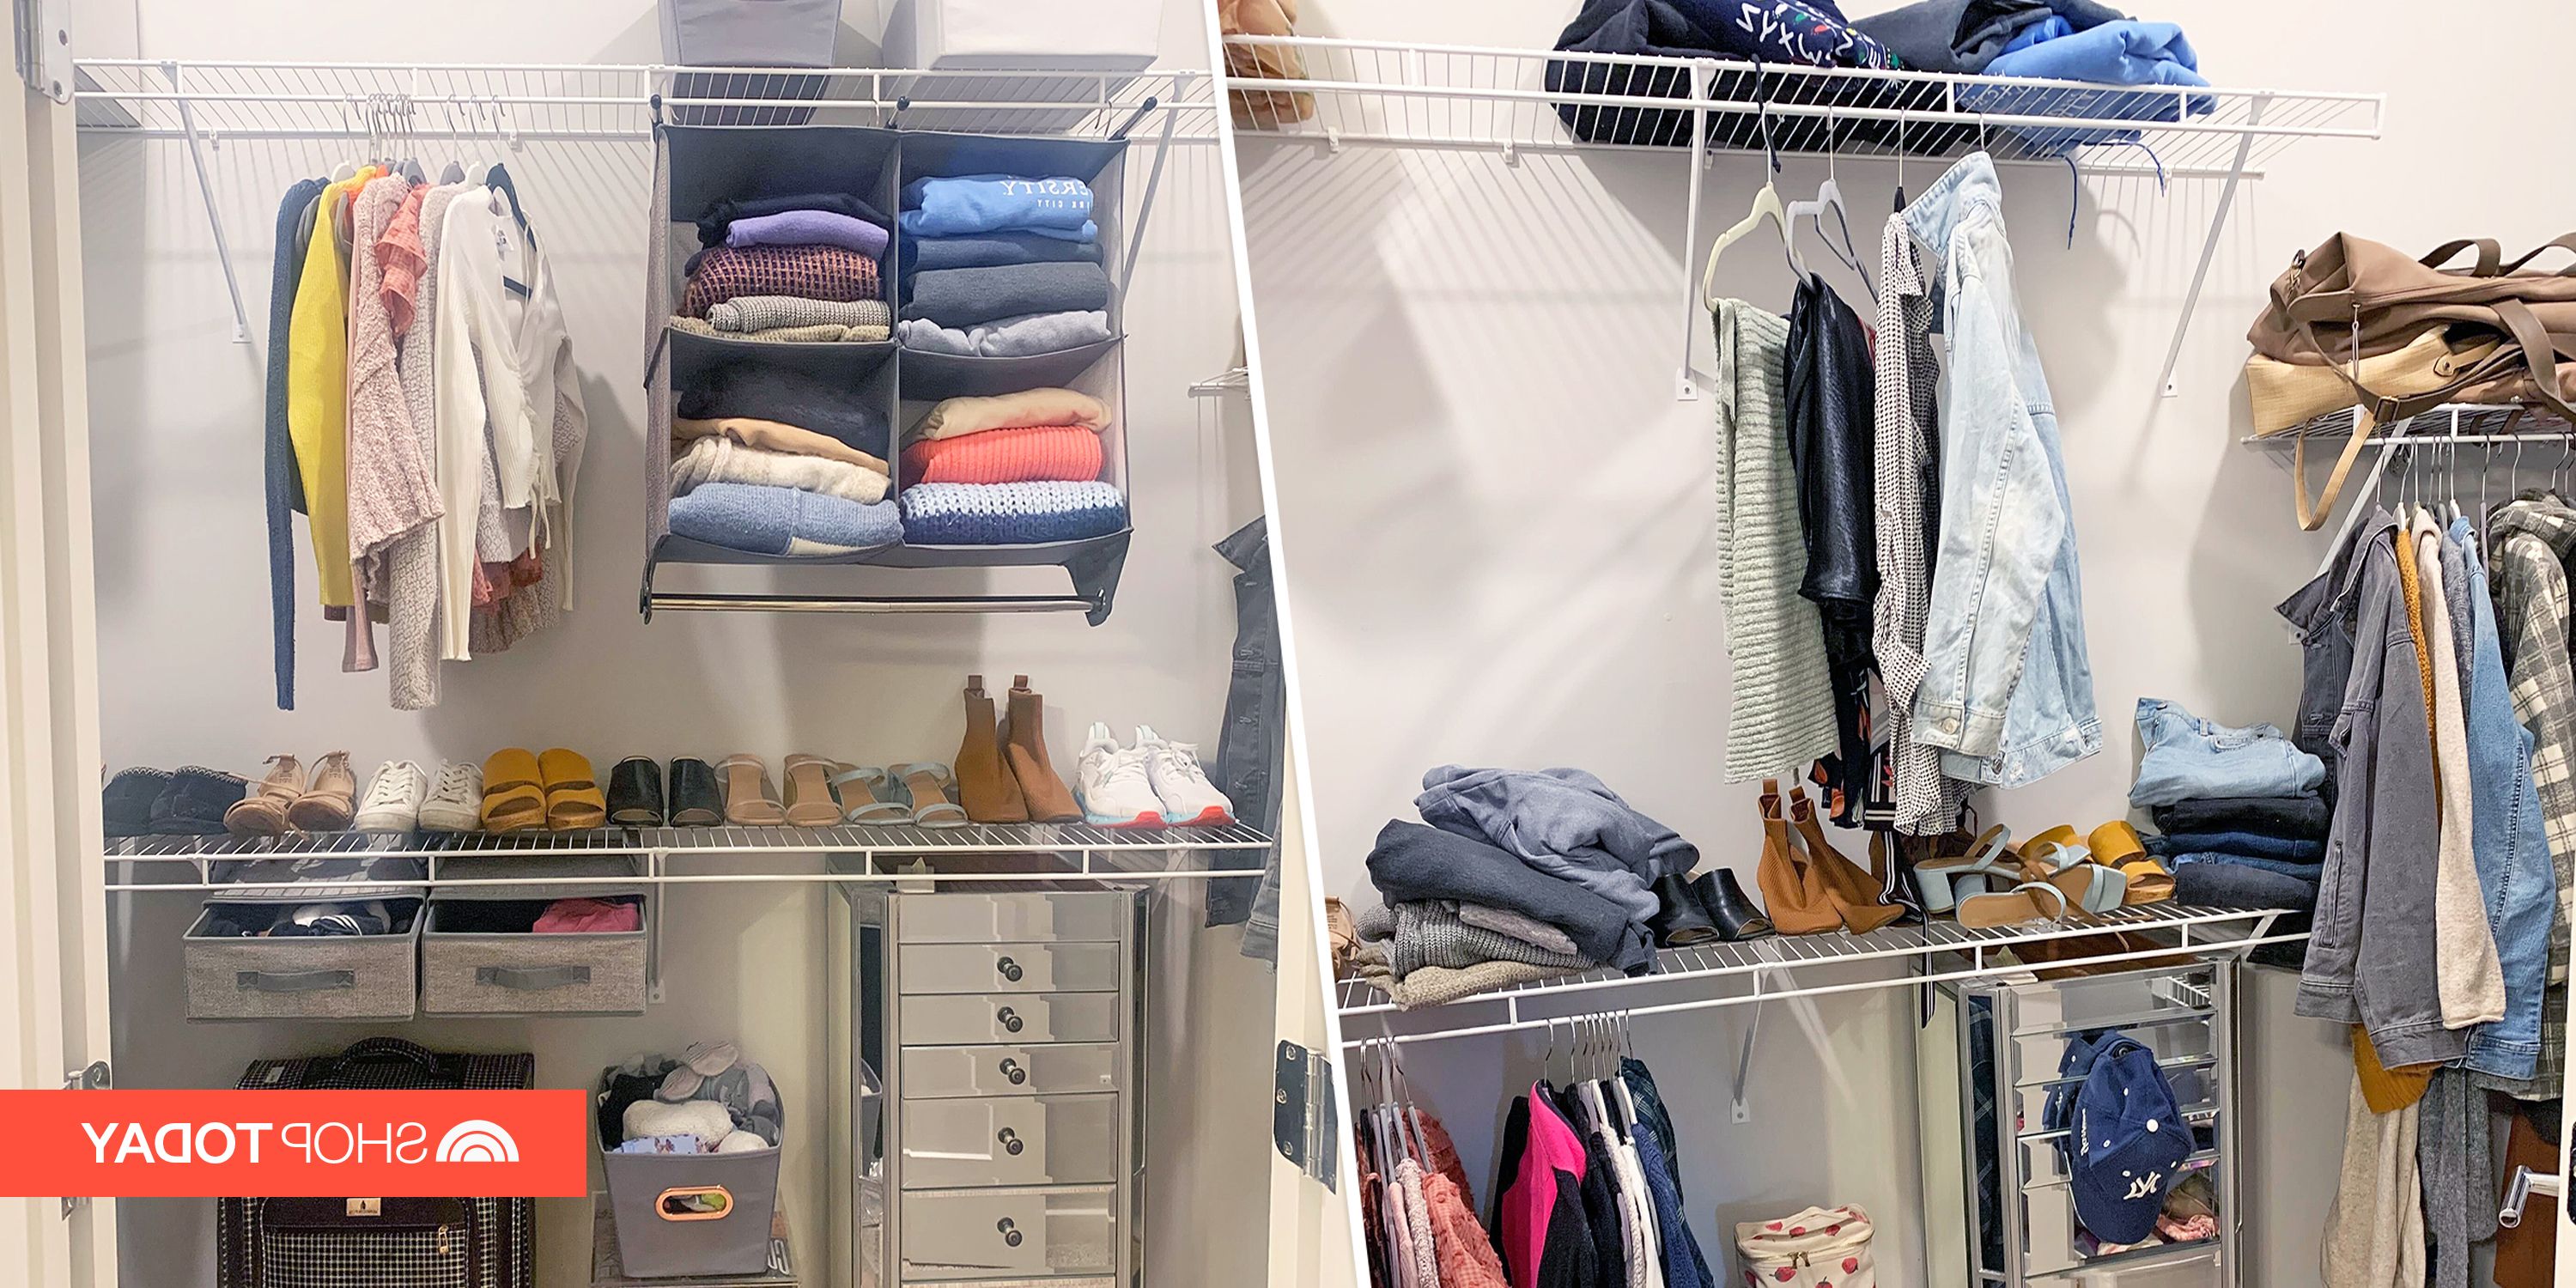 These Closet Organizers Clear Clutter And Maximize My Space Pertaining To Clothes Organizer Wardrobes (Gallery 6 of 20)